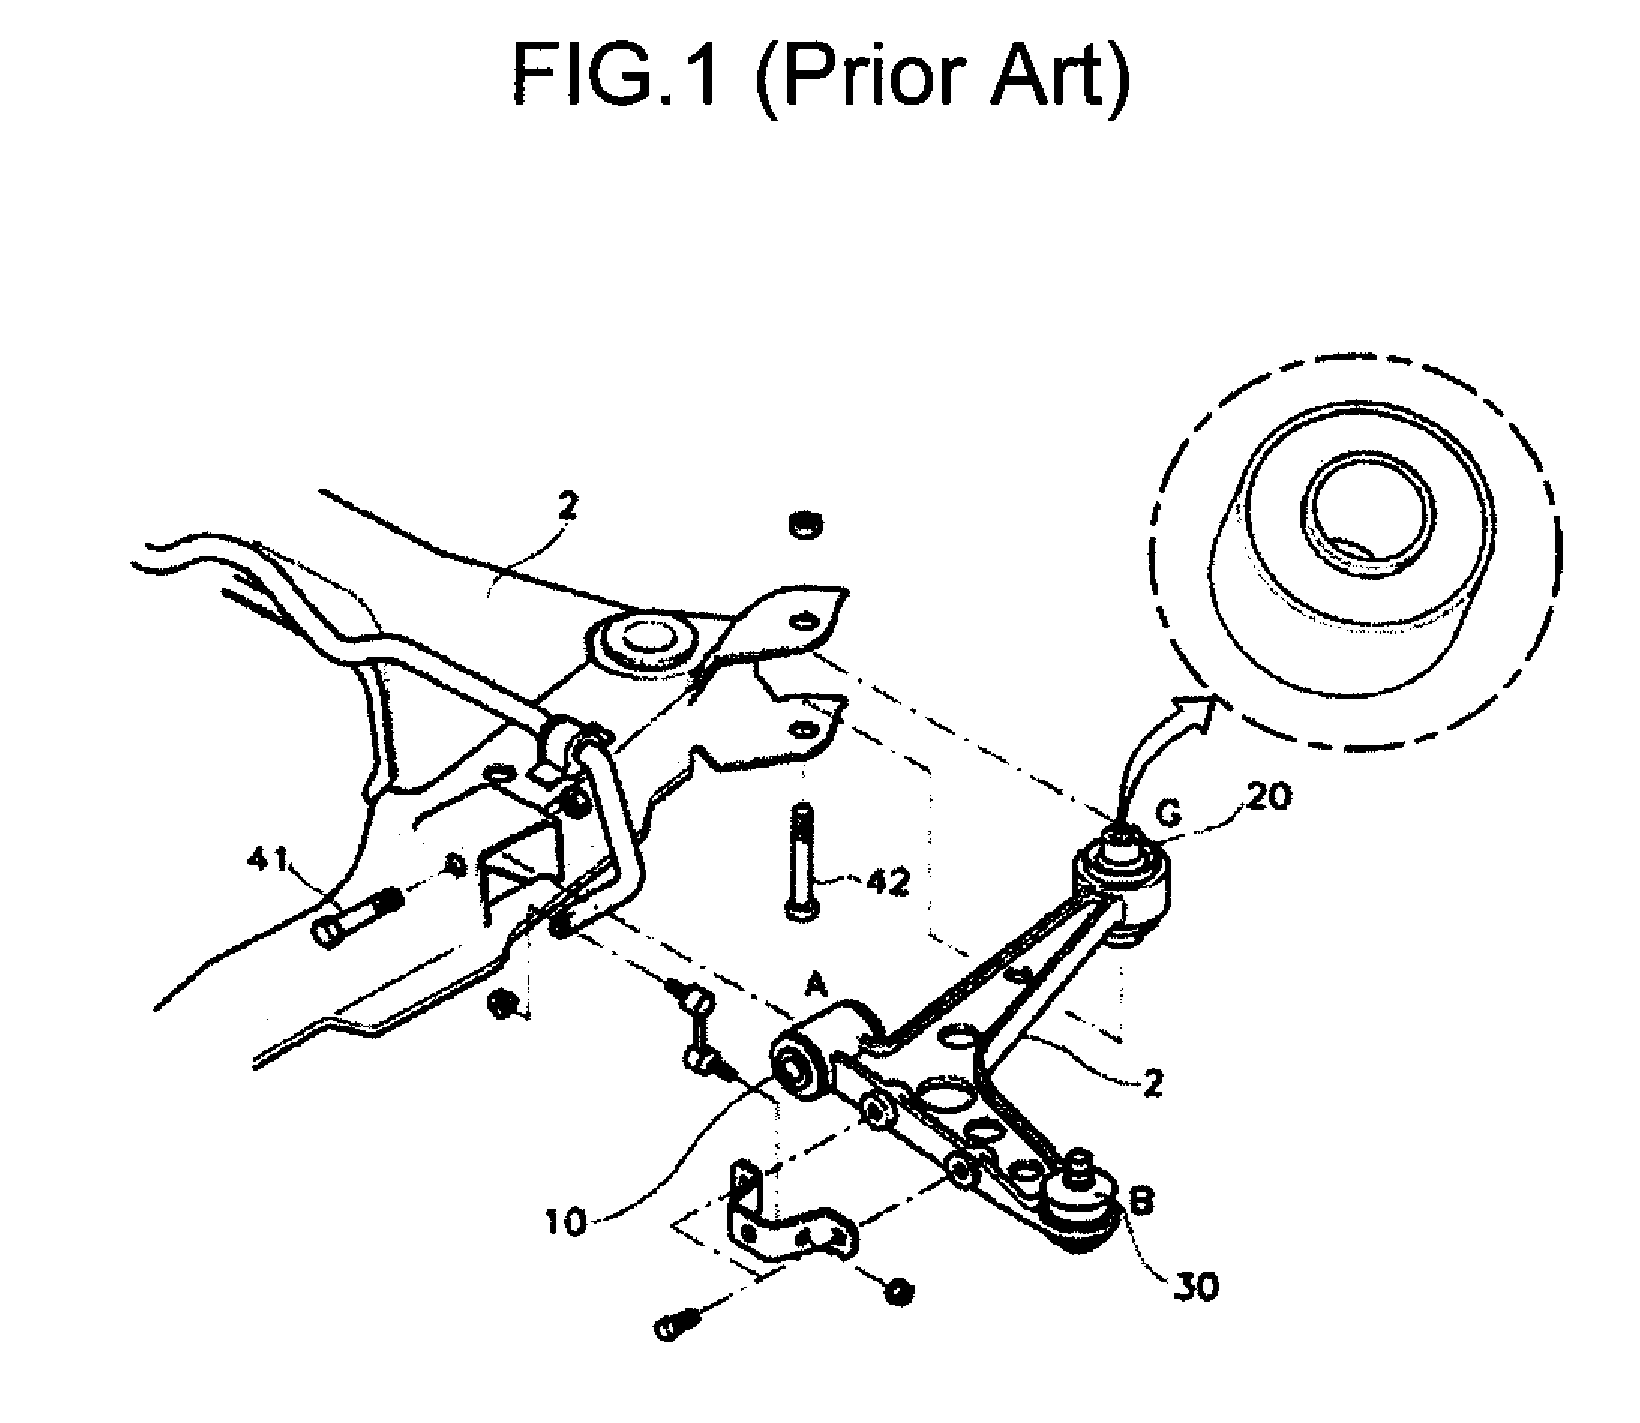 Single-axis damping joint for connecting chassis components for vehicles